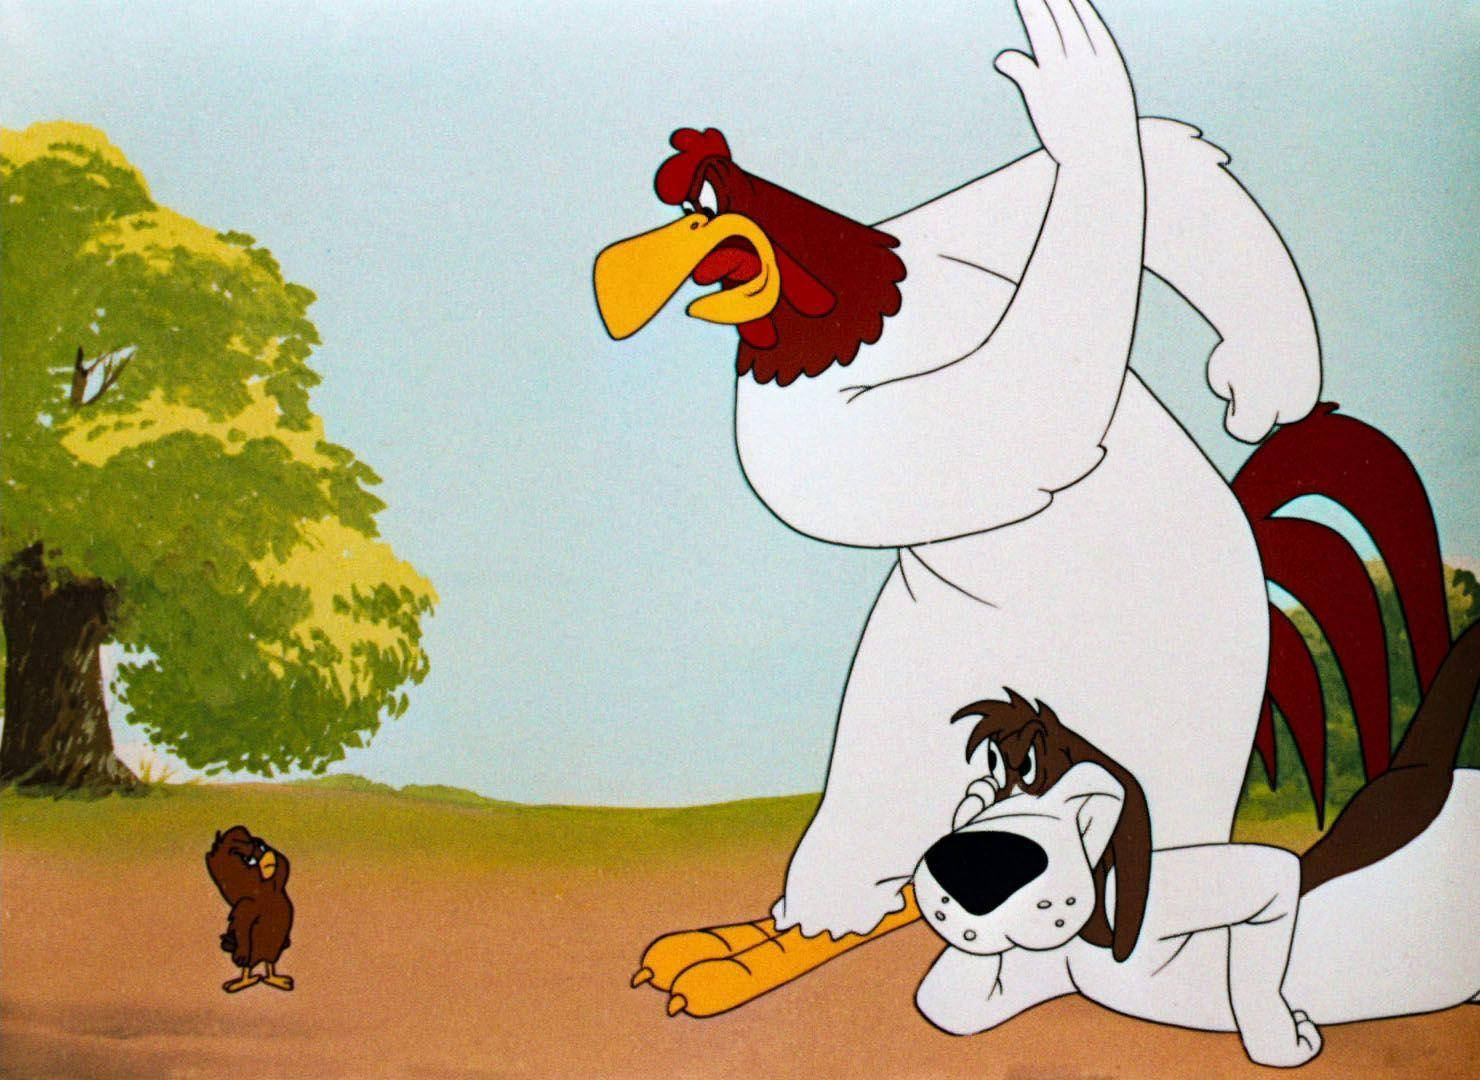 Foghorn Leghorn, the lovable rooster from Looney Tunes Wallpaper